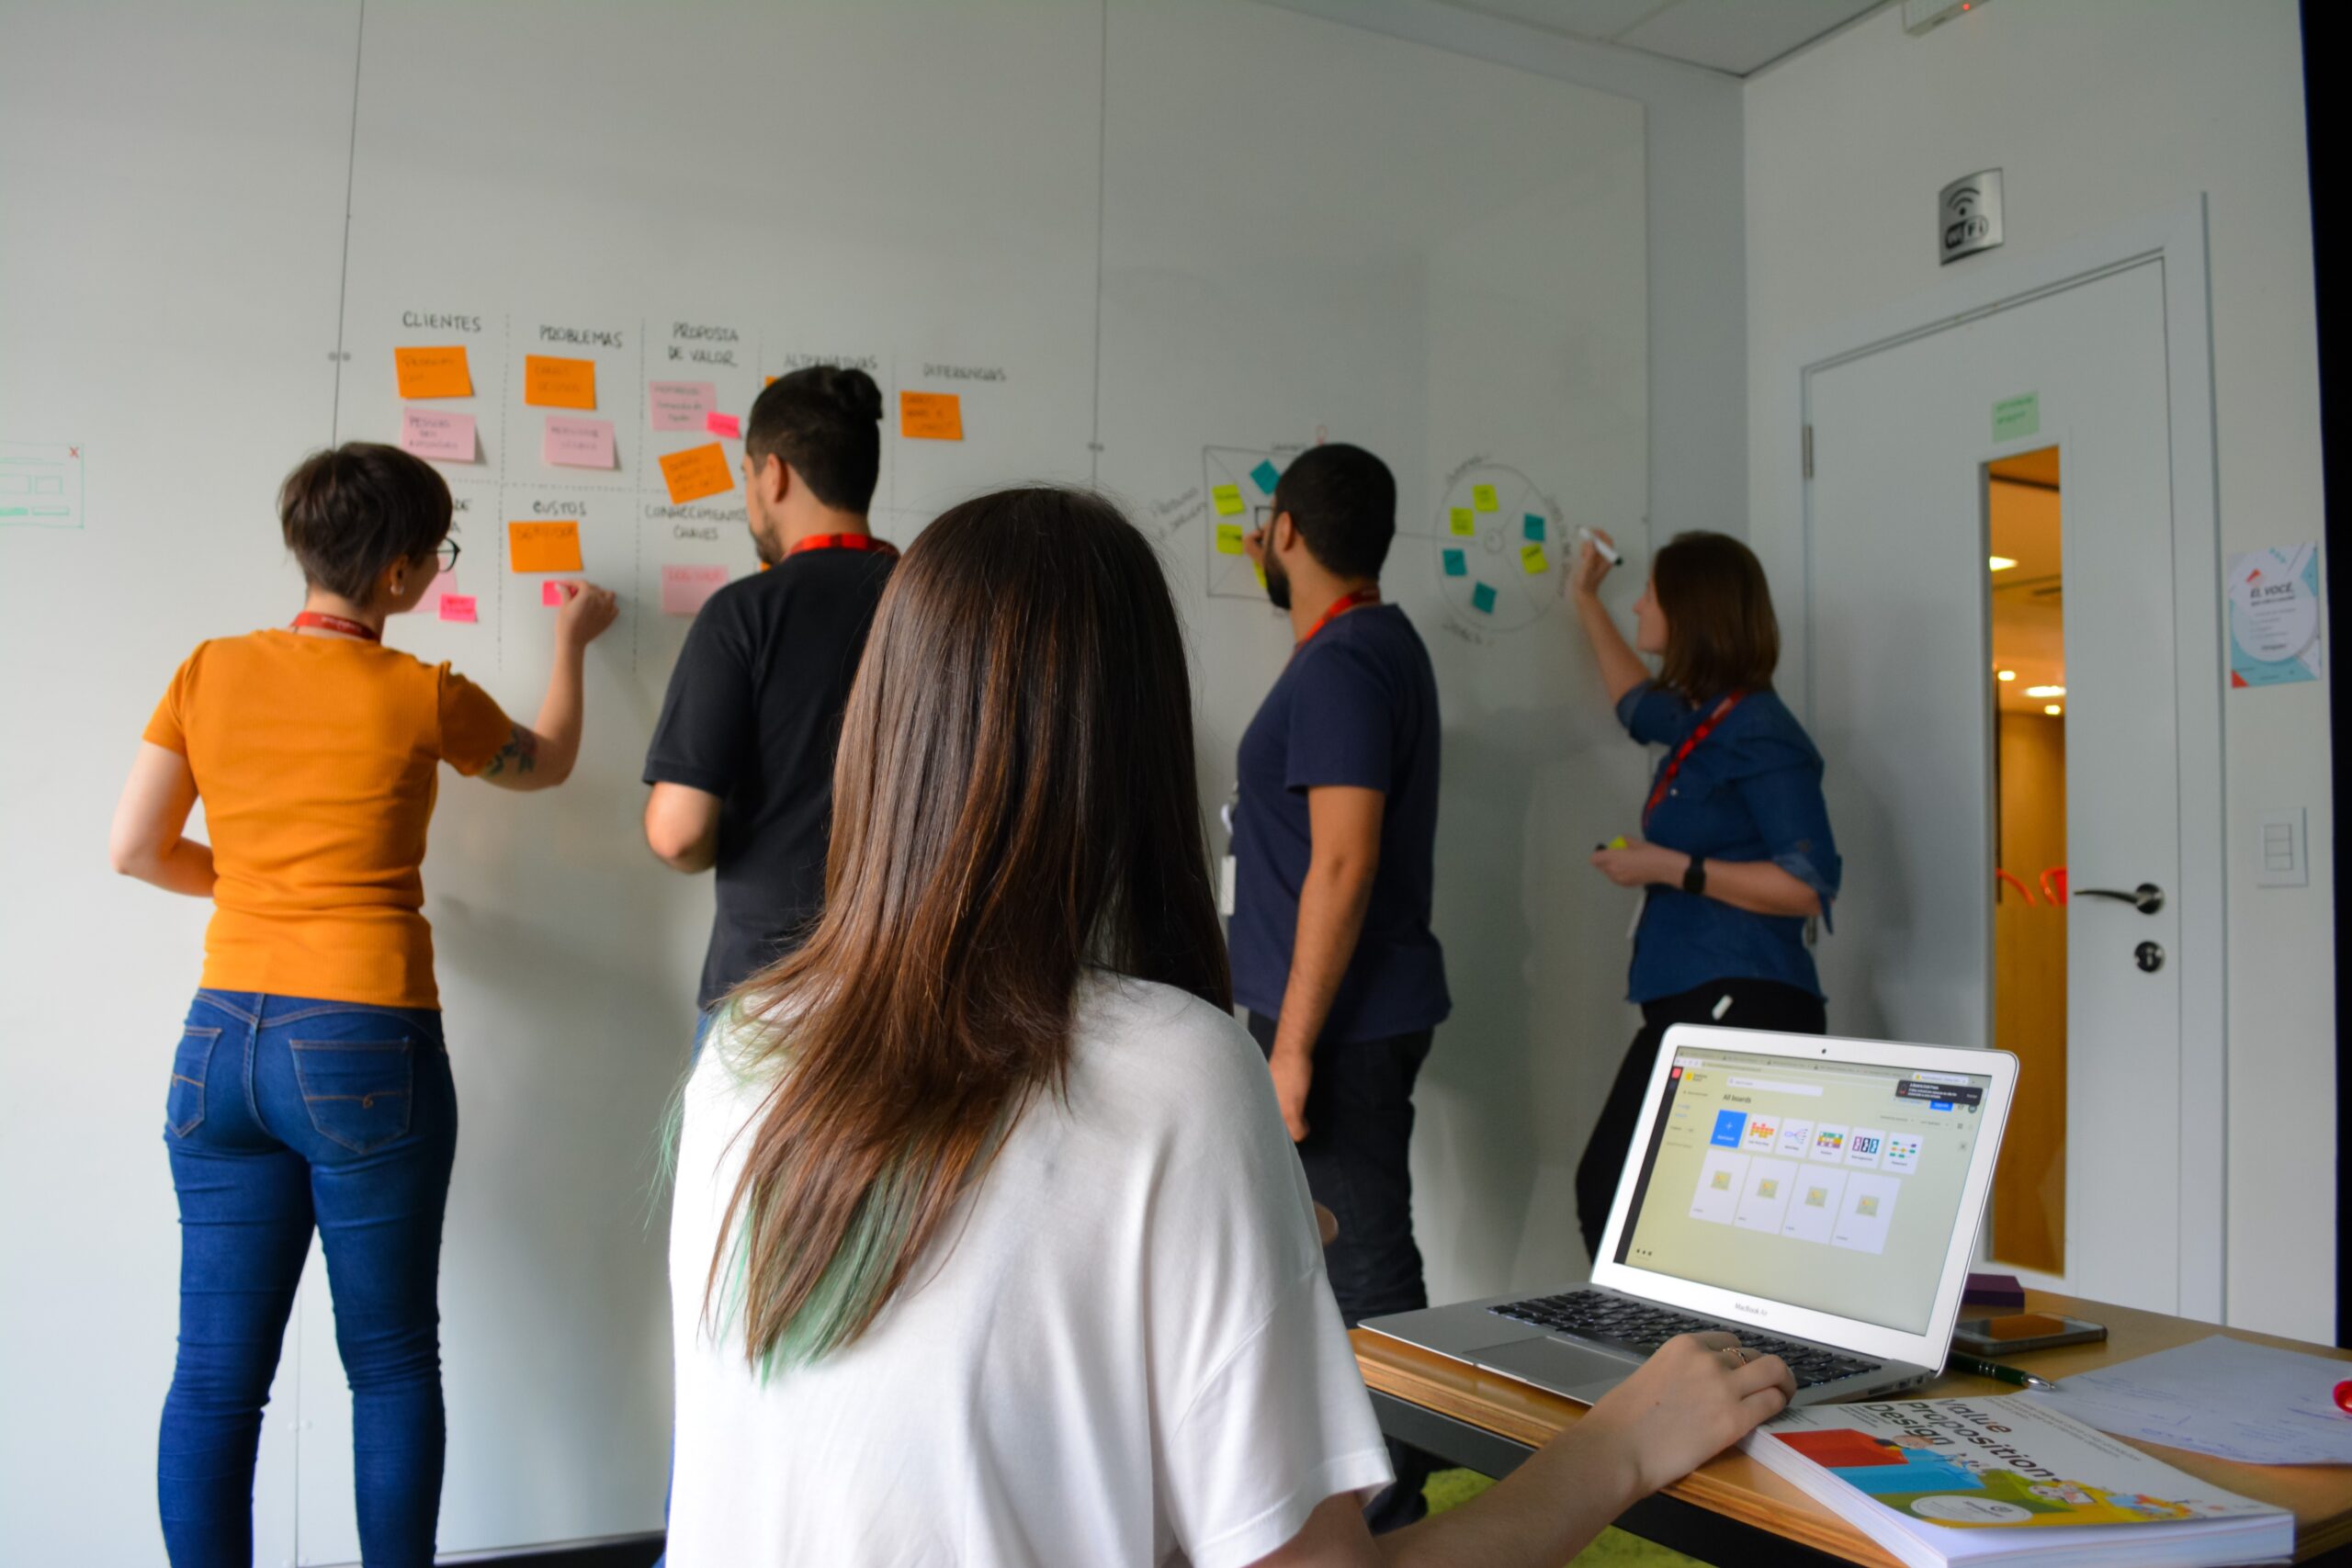 The Structure and Roles of a Product Team